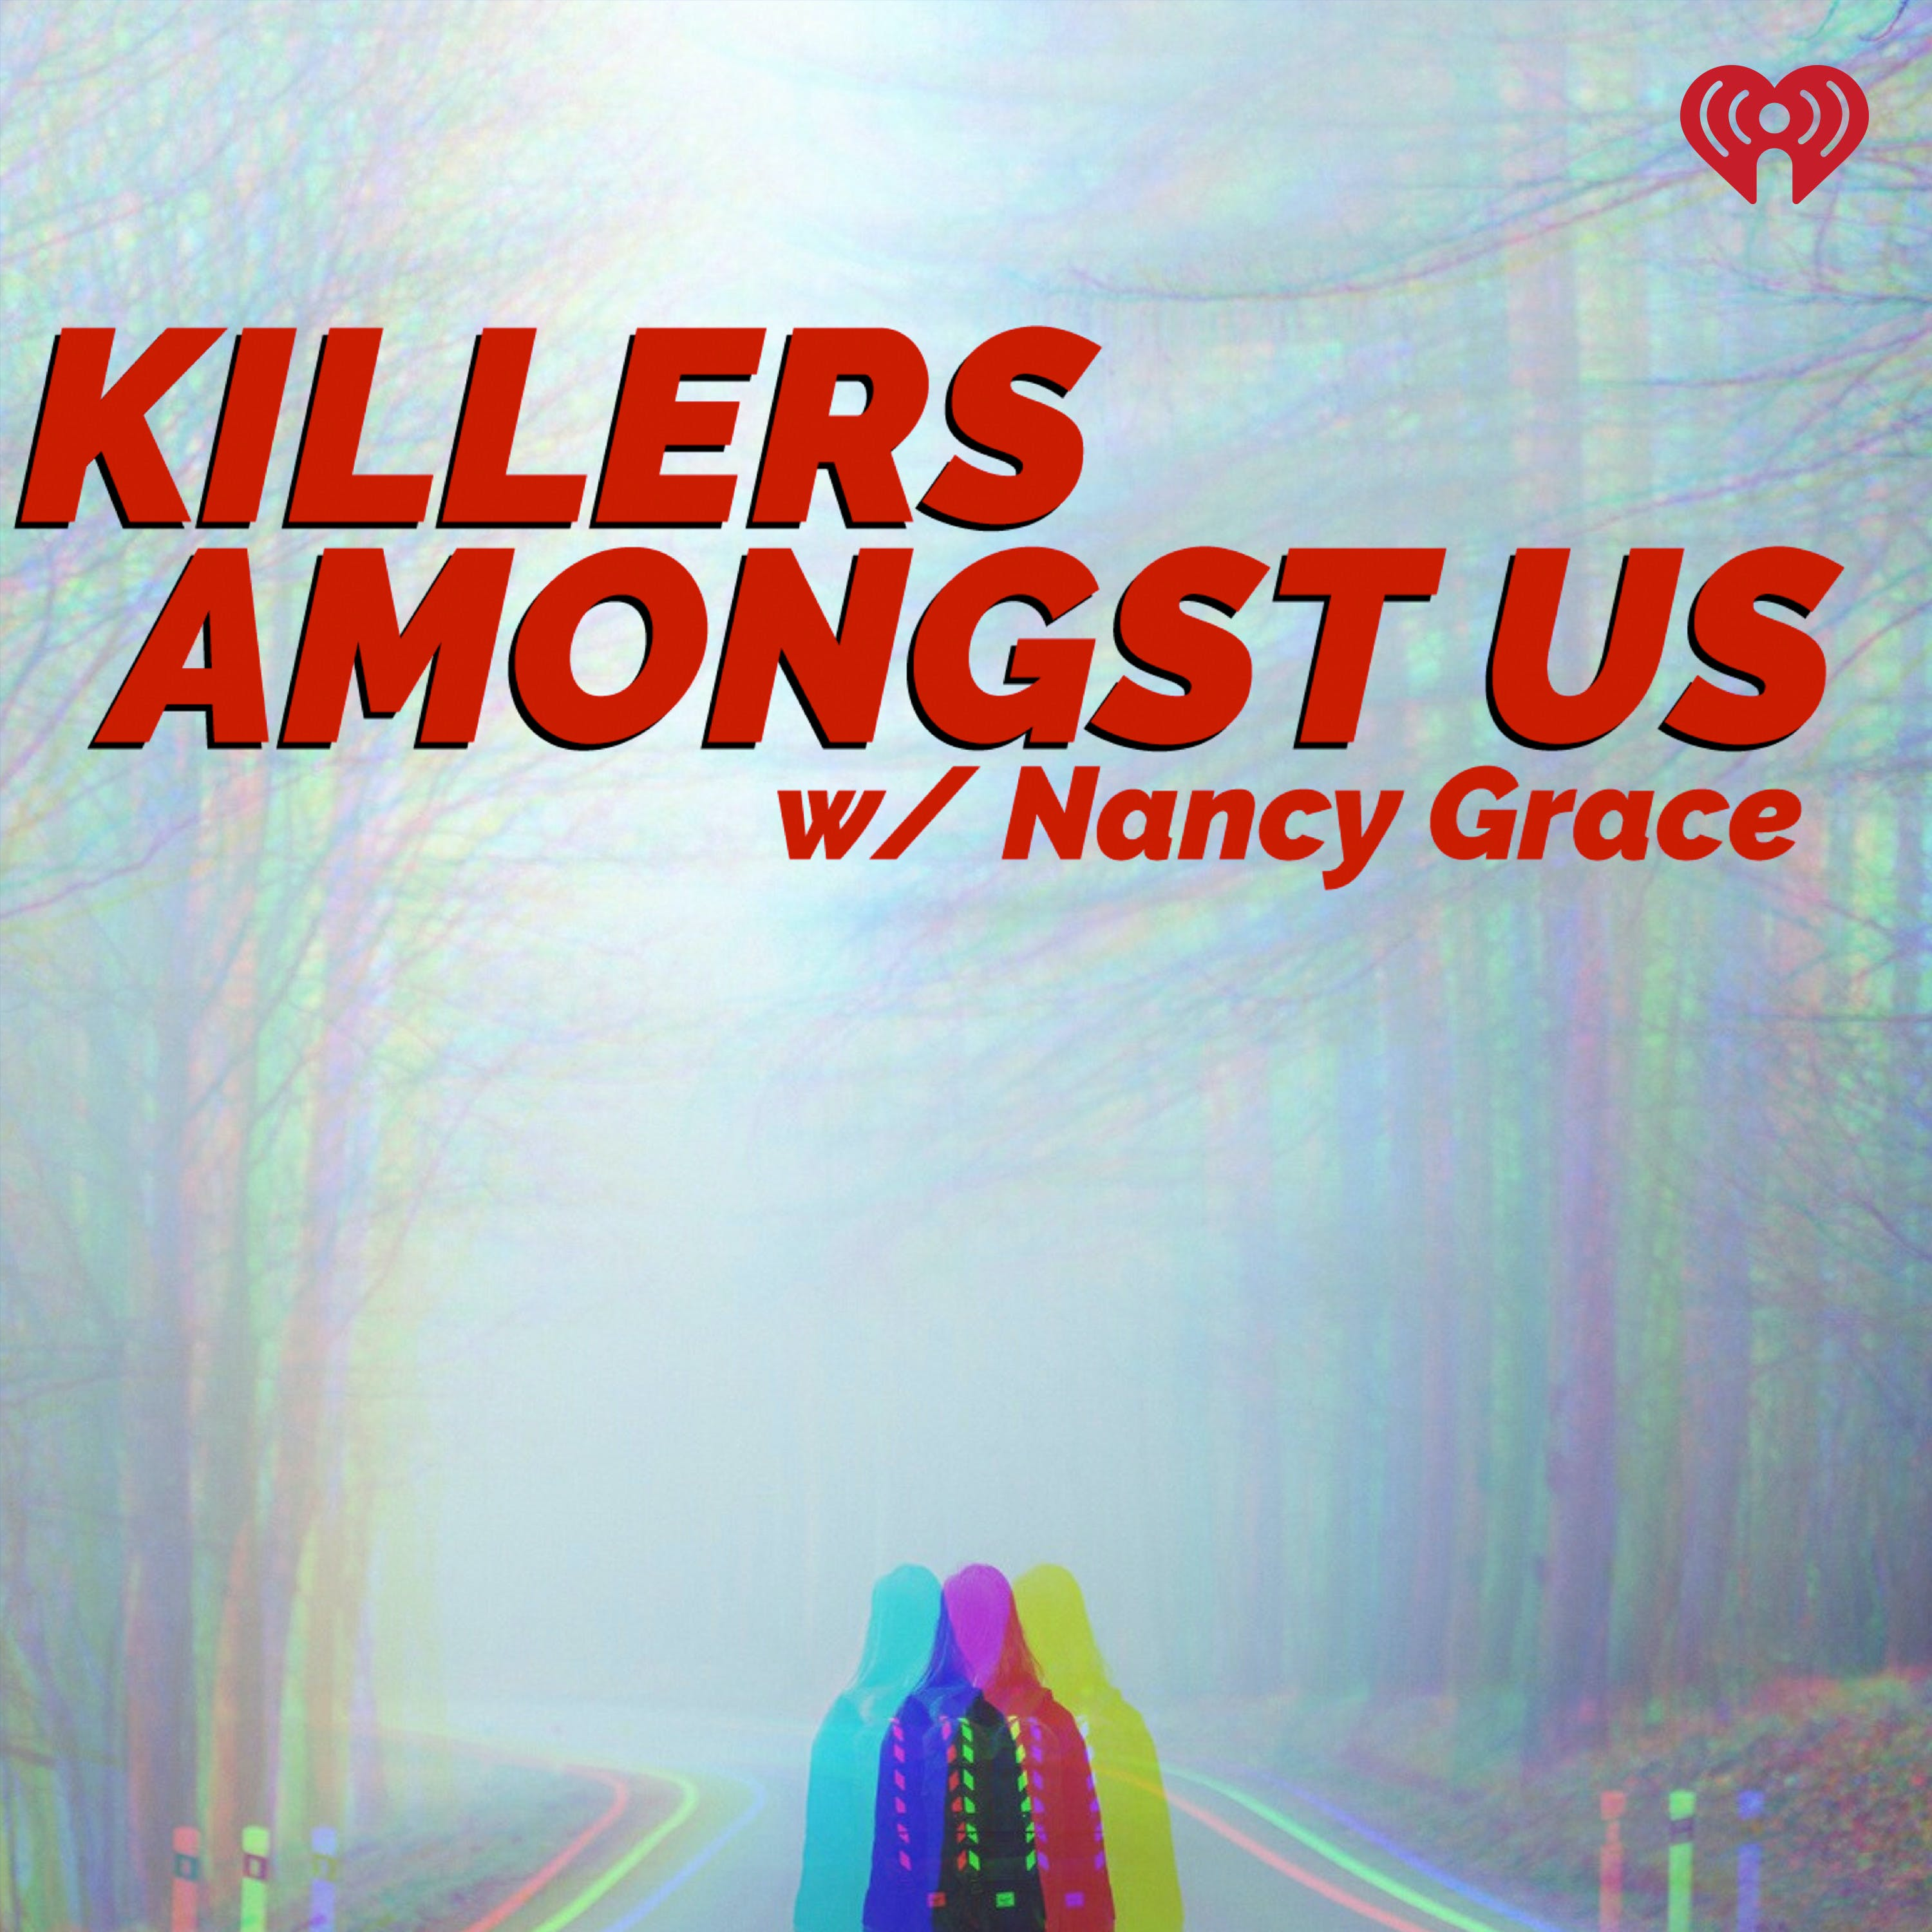 INTRODUCING Killers Amongst Us with Nancy Grace